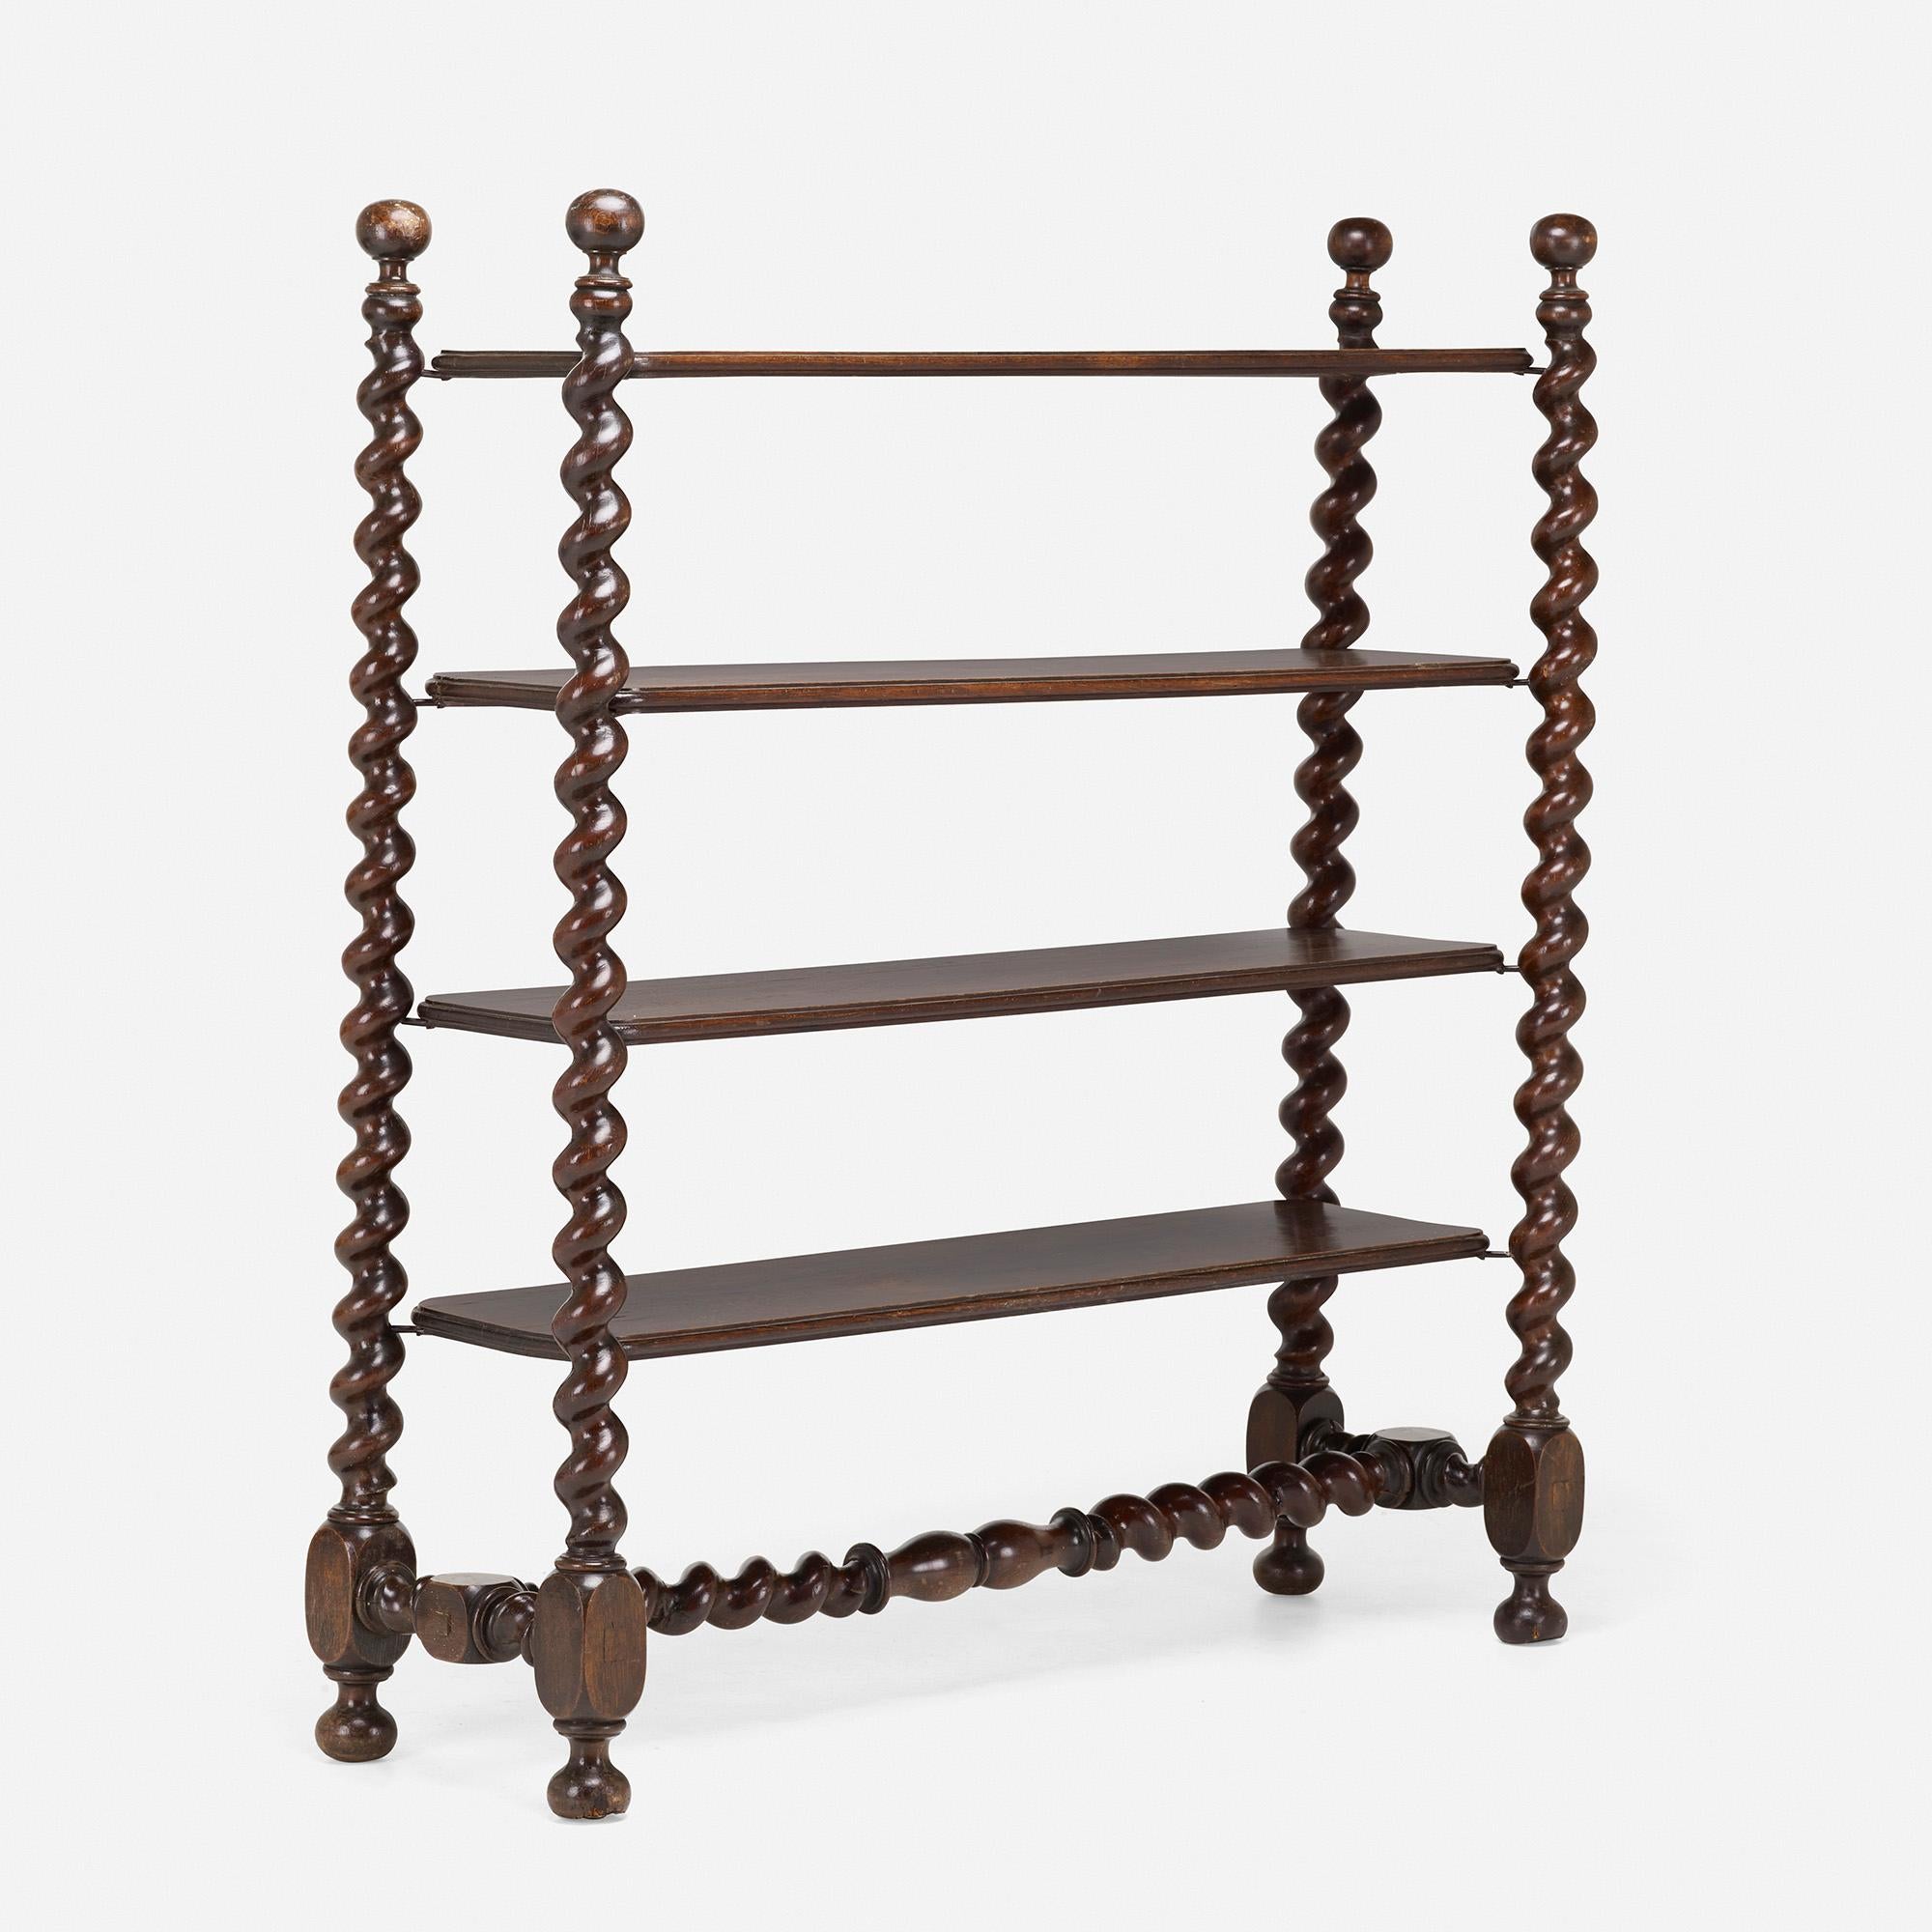 Created: c. 1900

Material: carved oak, enameled steel

Size: 61.5 W × 17 D × 71 H in

Description: Unit features four fixed shelves.